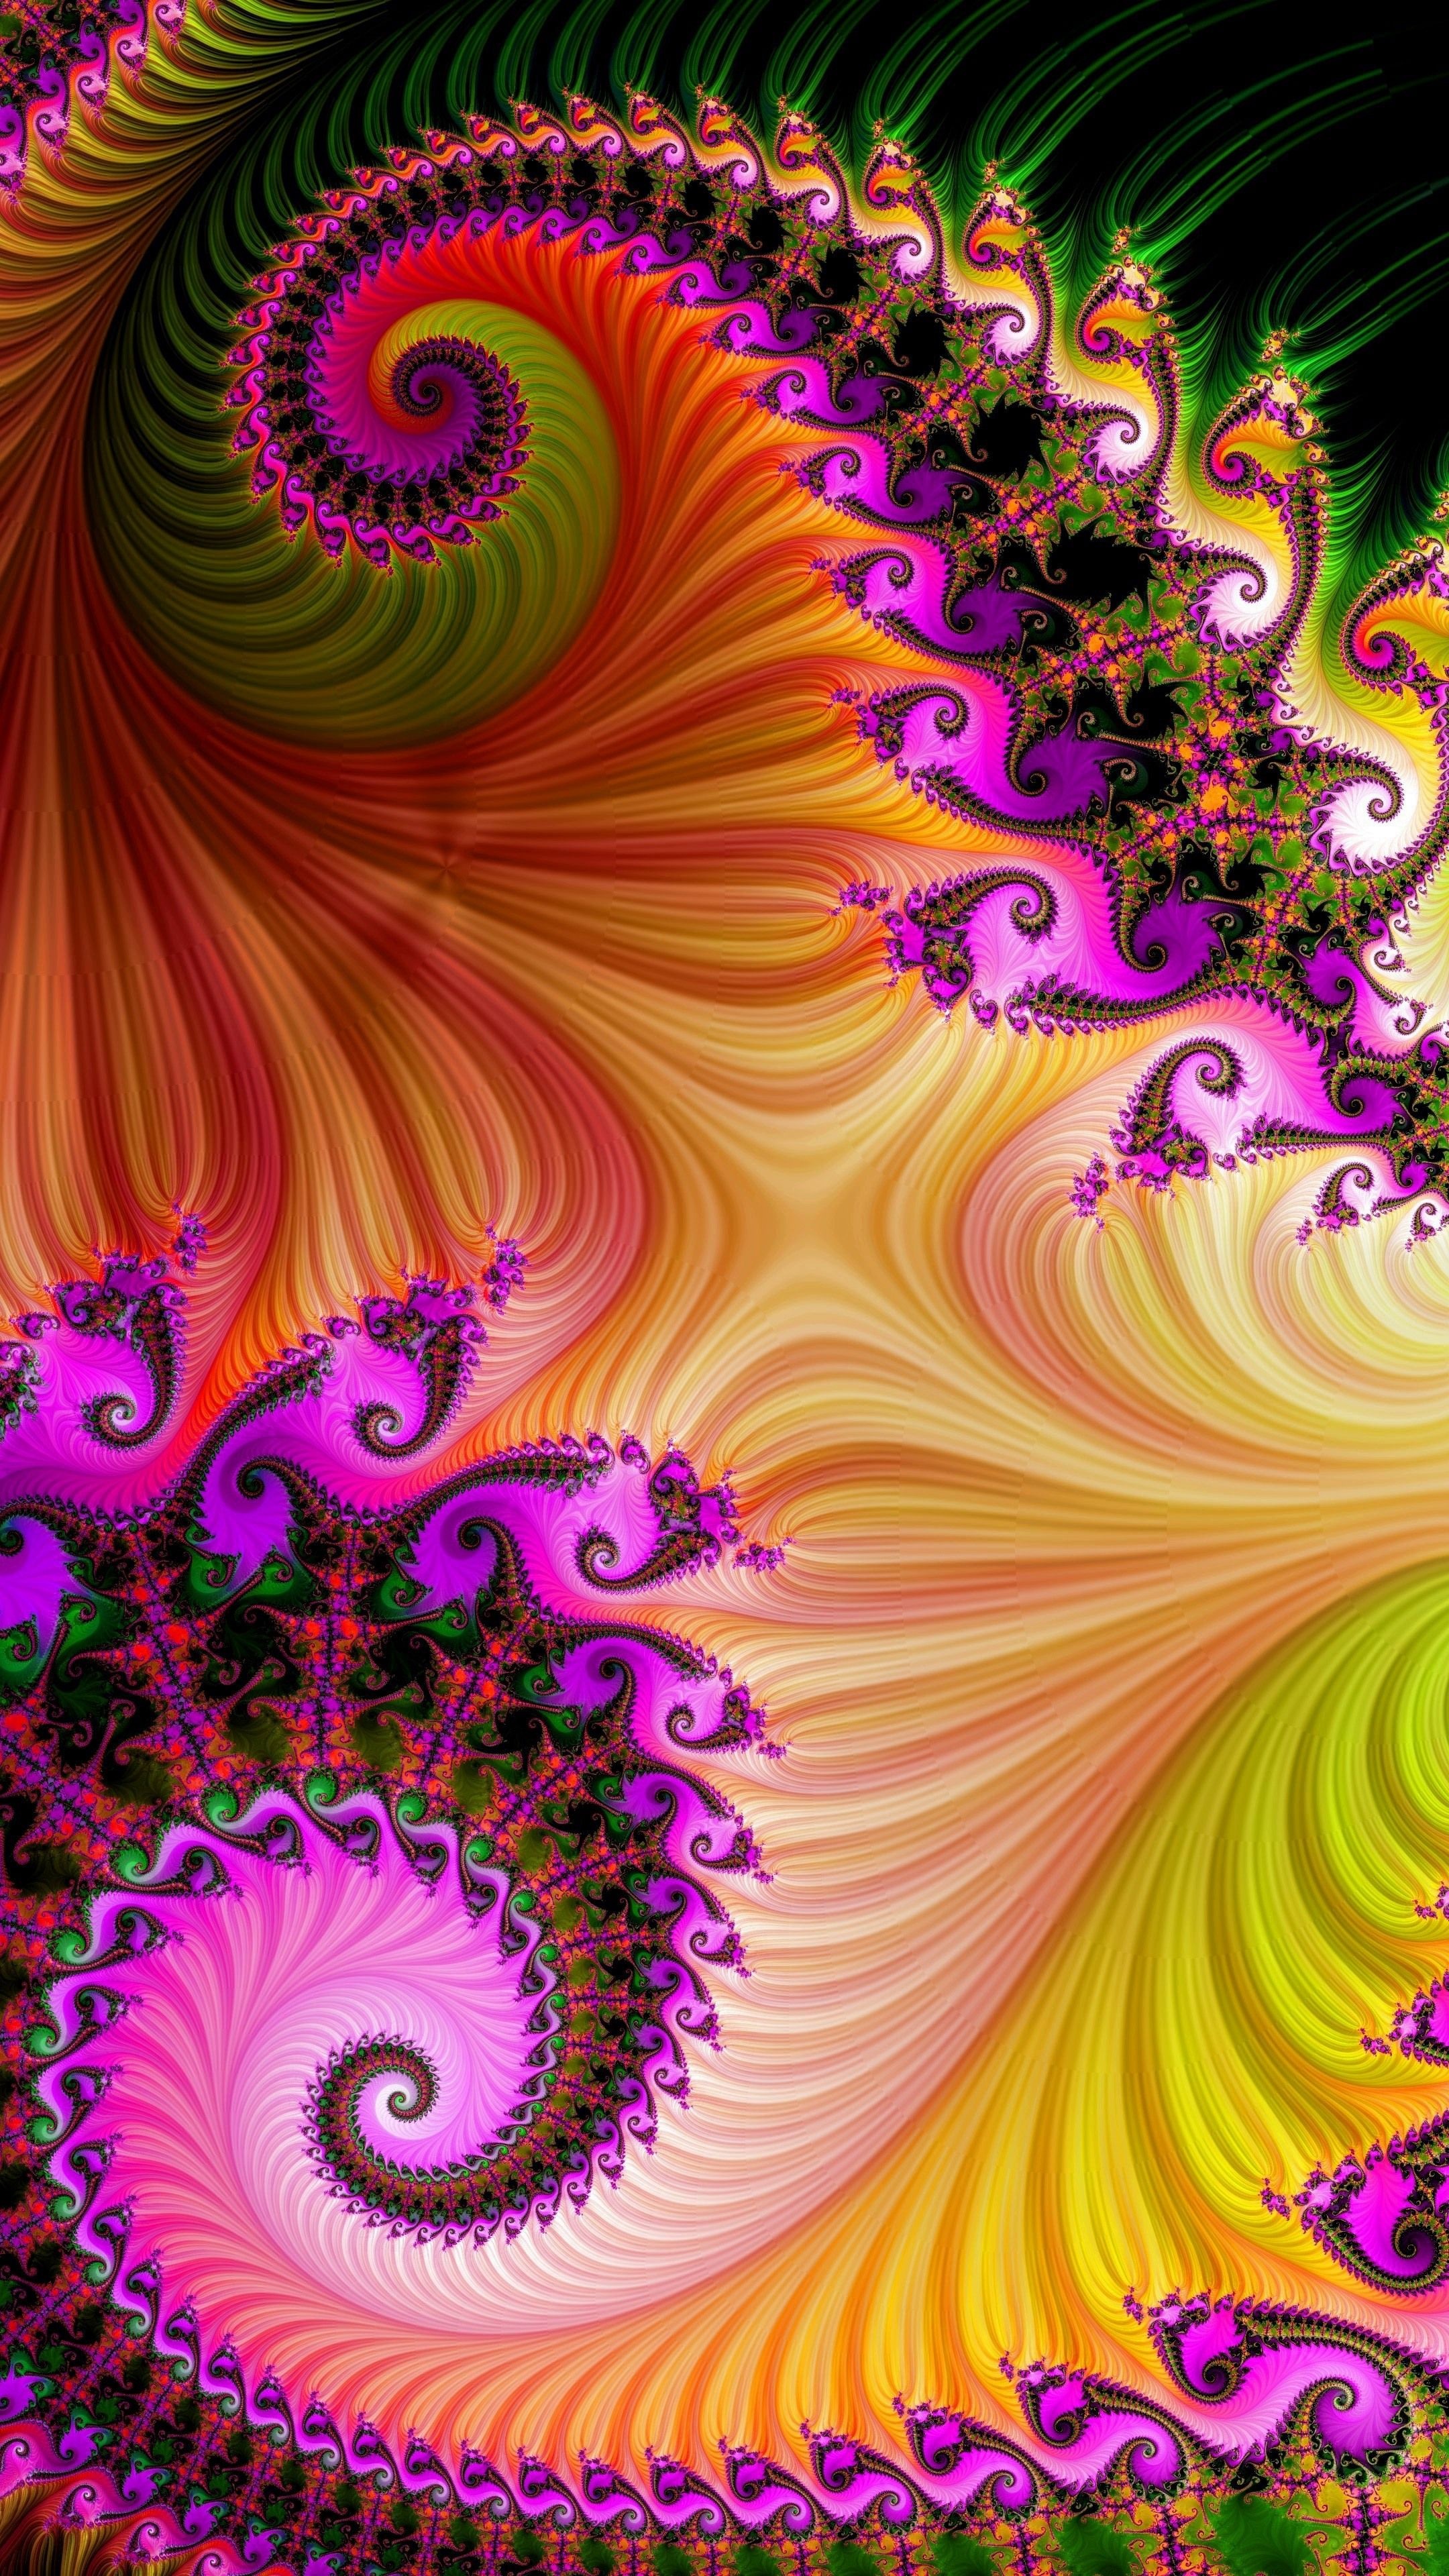 Fractals in 2022, Illusion paintings, Abstract art, Fractal art, 2160x3840 4K Phone